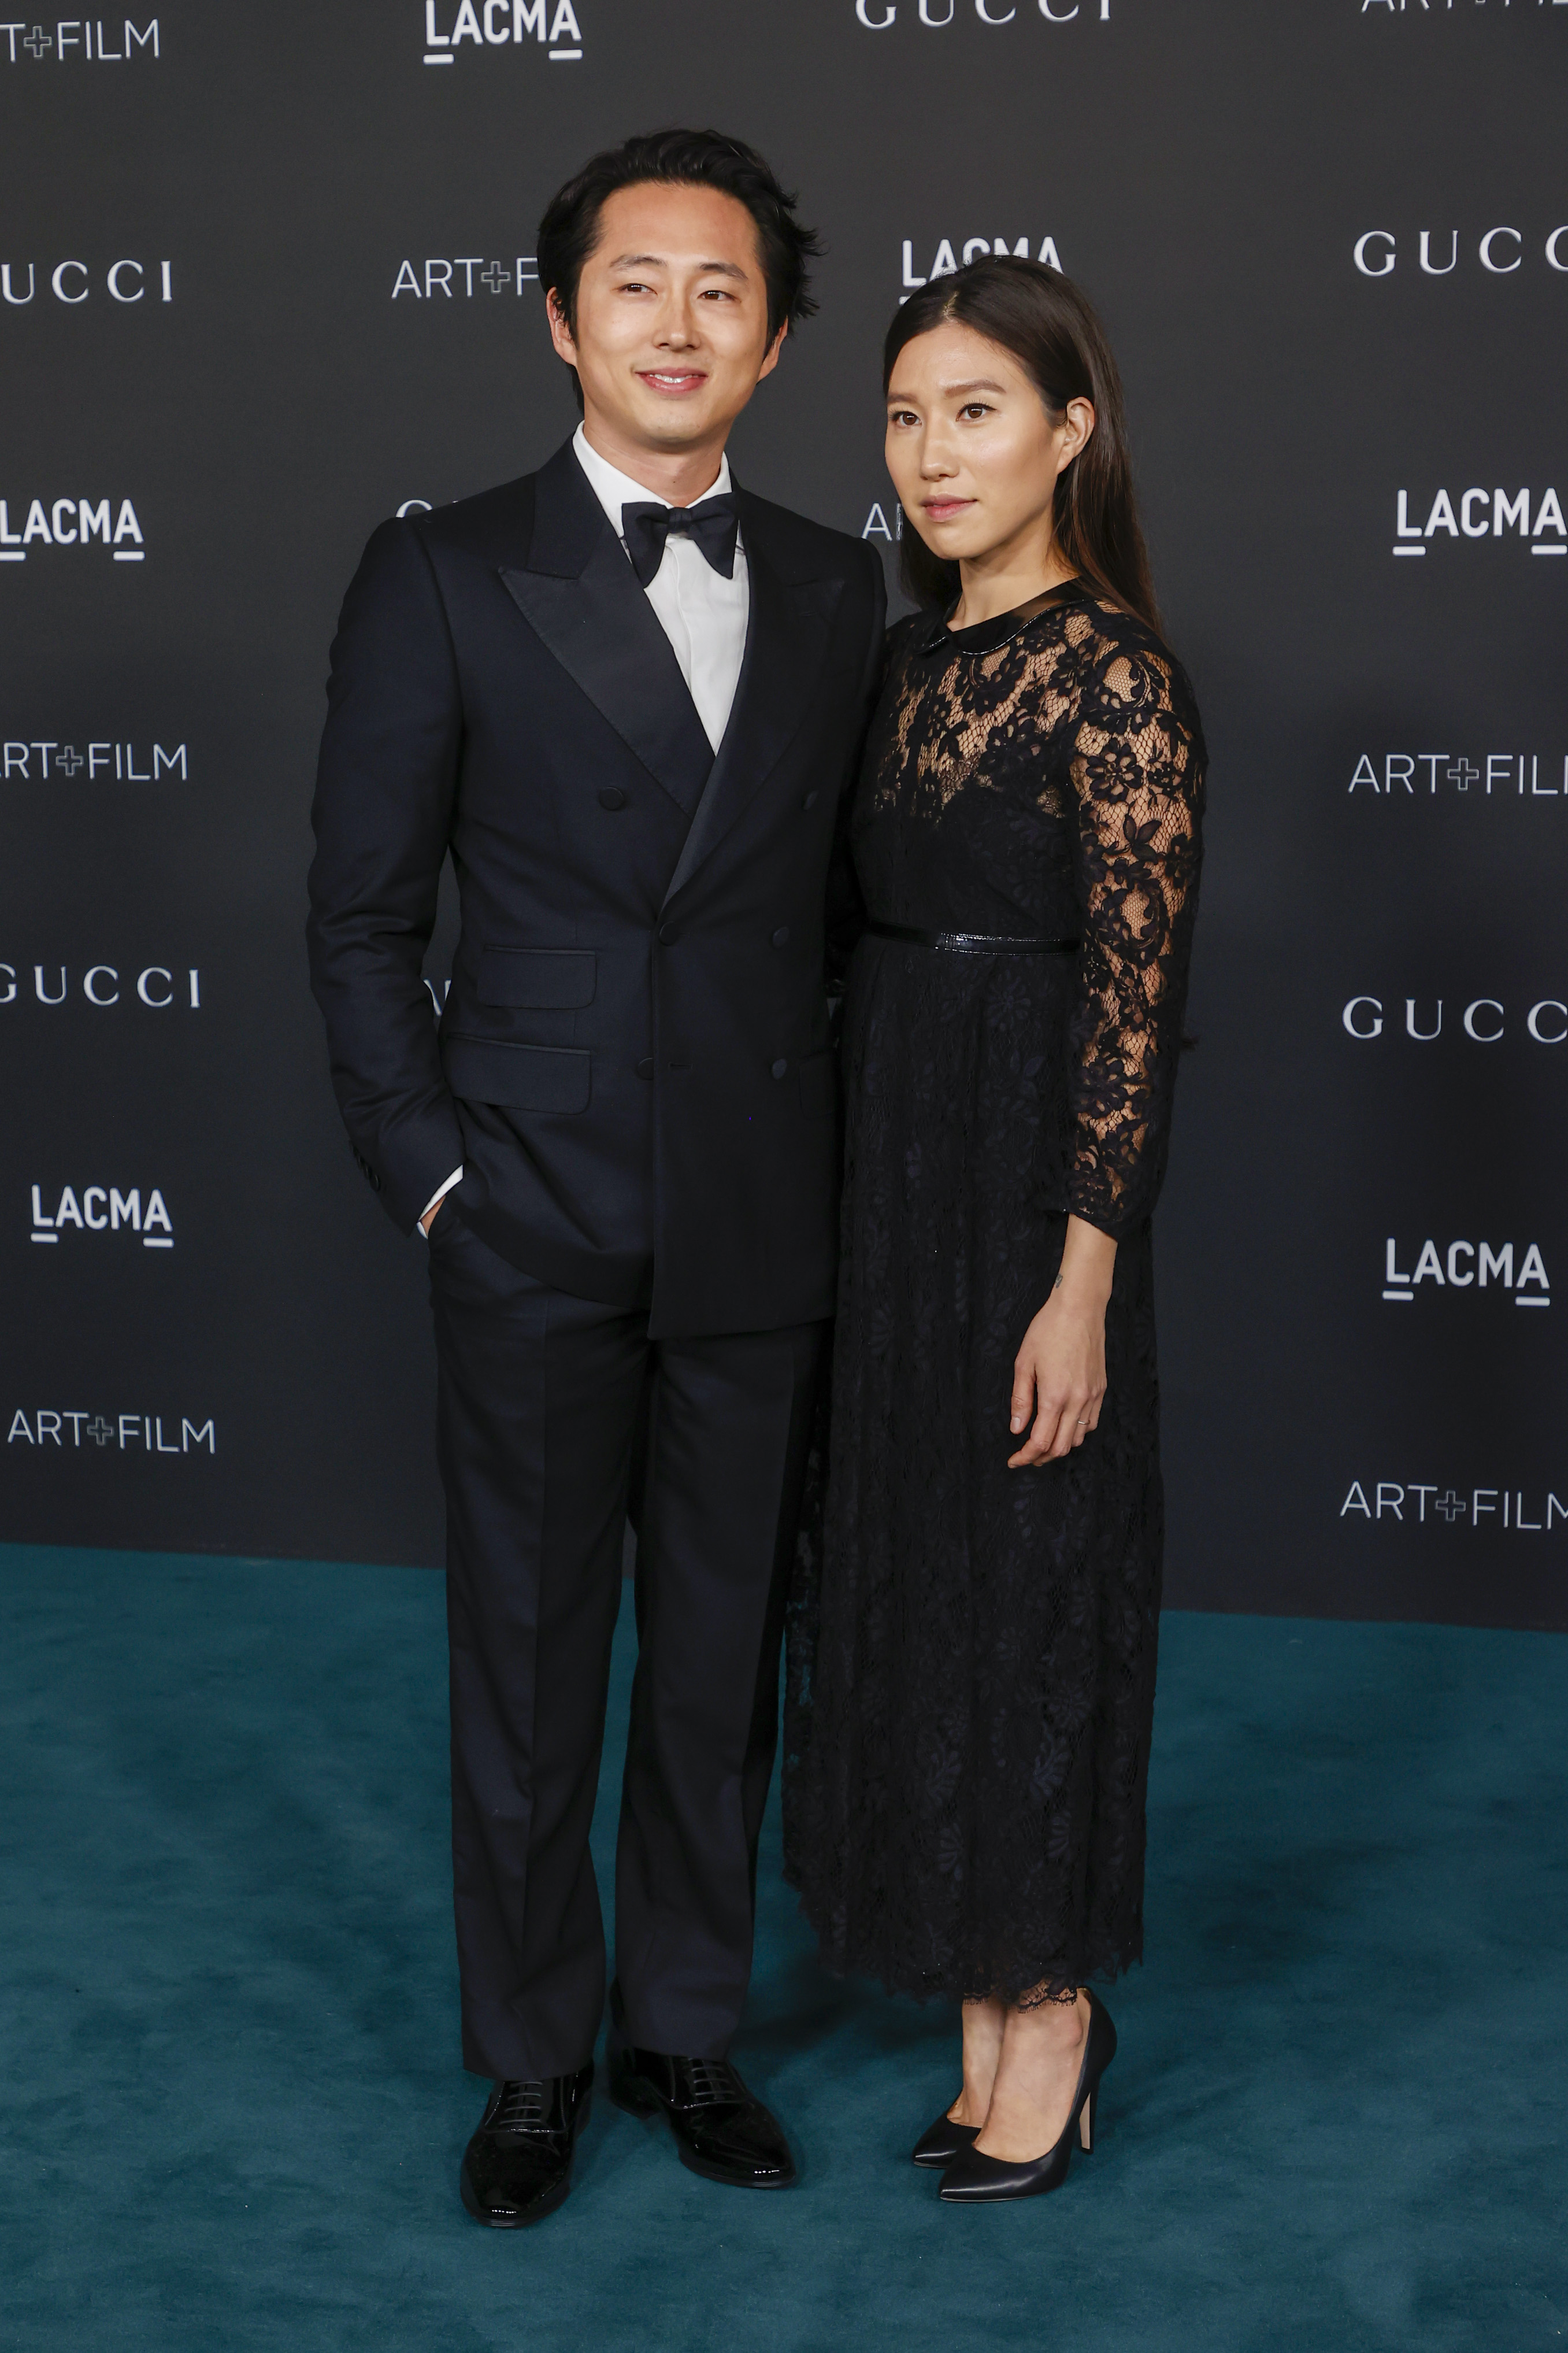 Steven Yeun and Joana Pak pose at the 10th Annual LACMA ART+FILM GALA presented by Gucci at Los Angeles County Museum of Art on November 6, 2021, in Los Angeles, California | Source: Getty Images